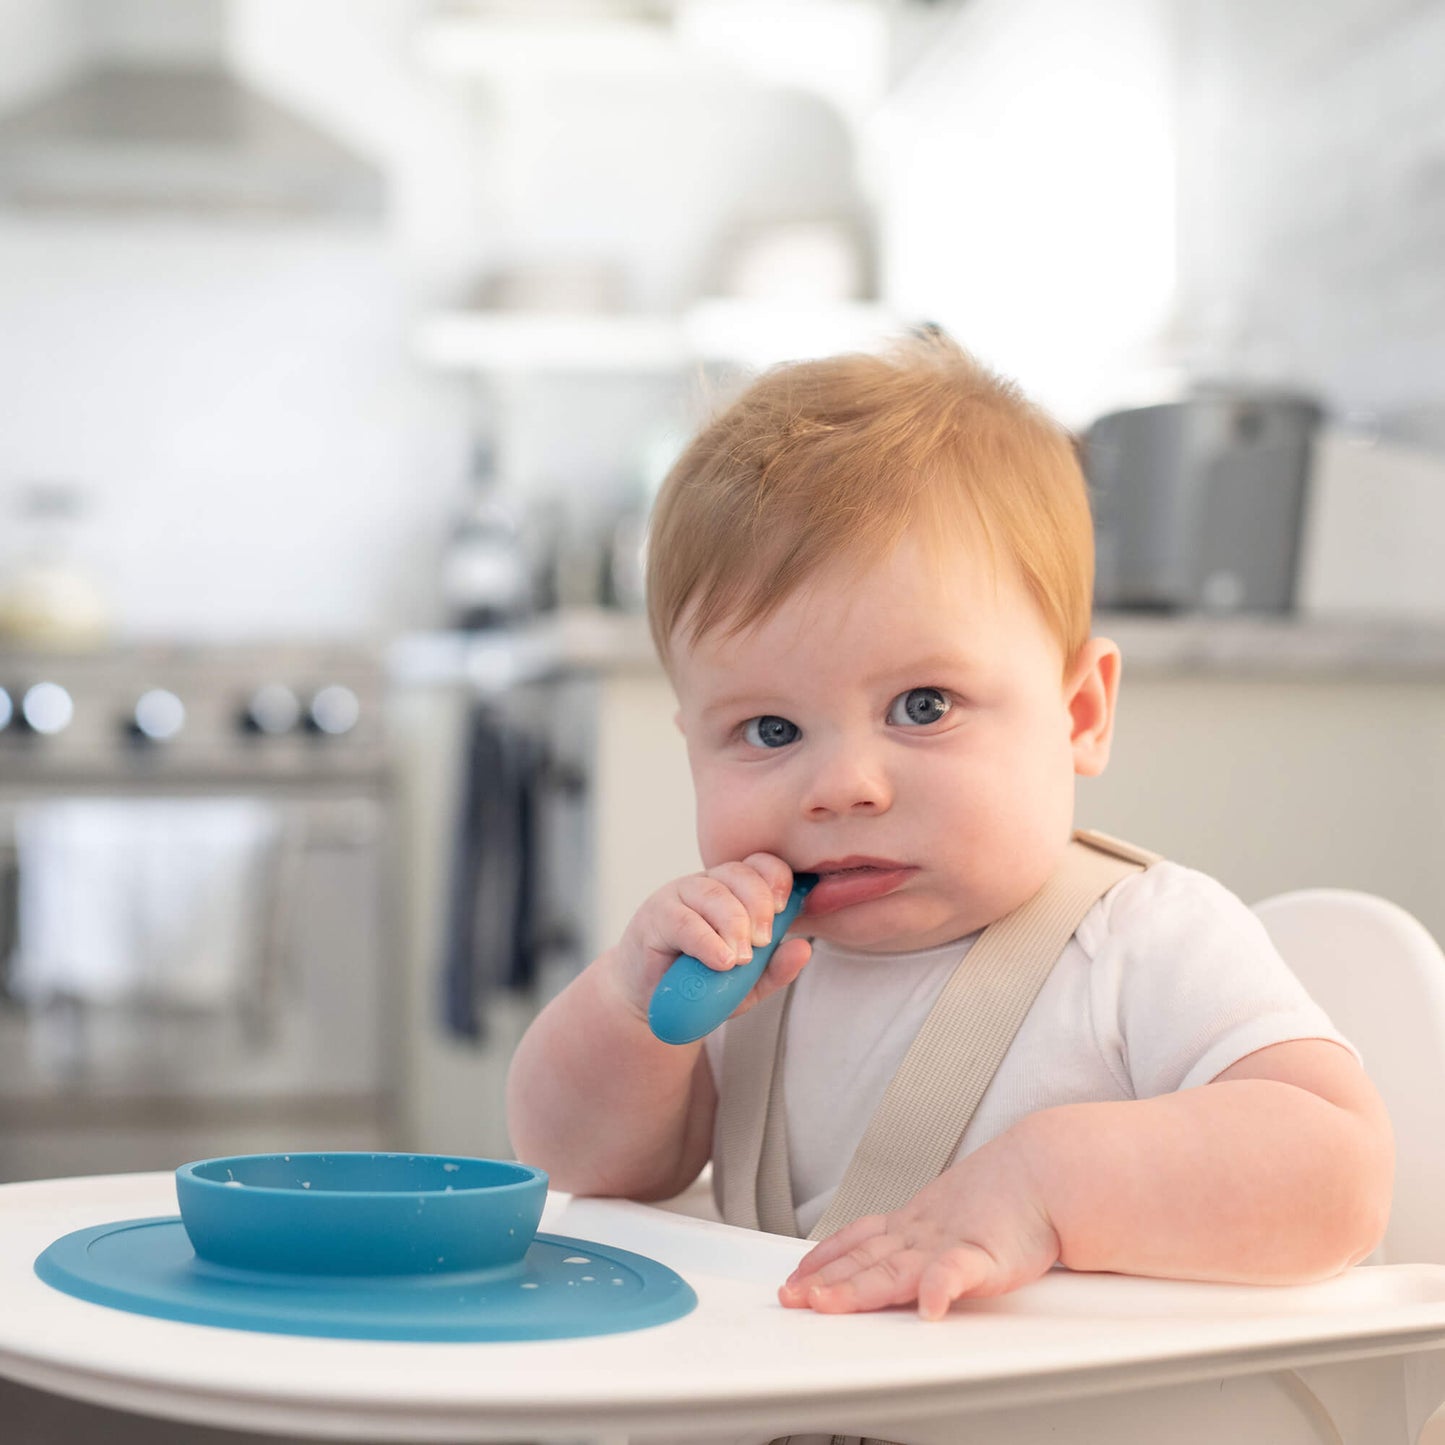 The Tiny Spoon in Blue by ezpz / Small, Sensory Silicone Spoon for Babies